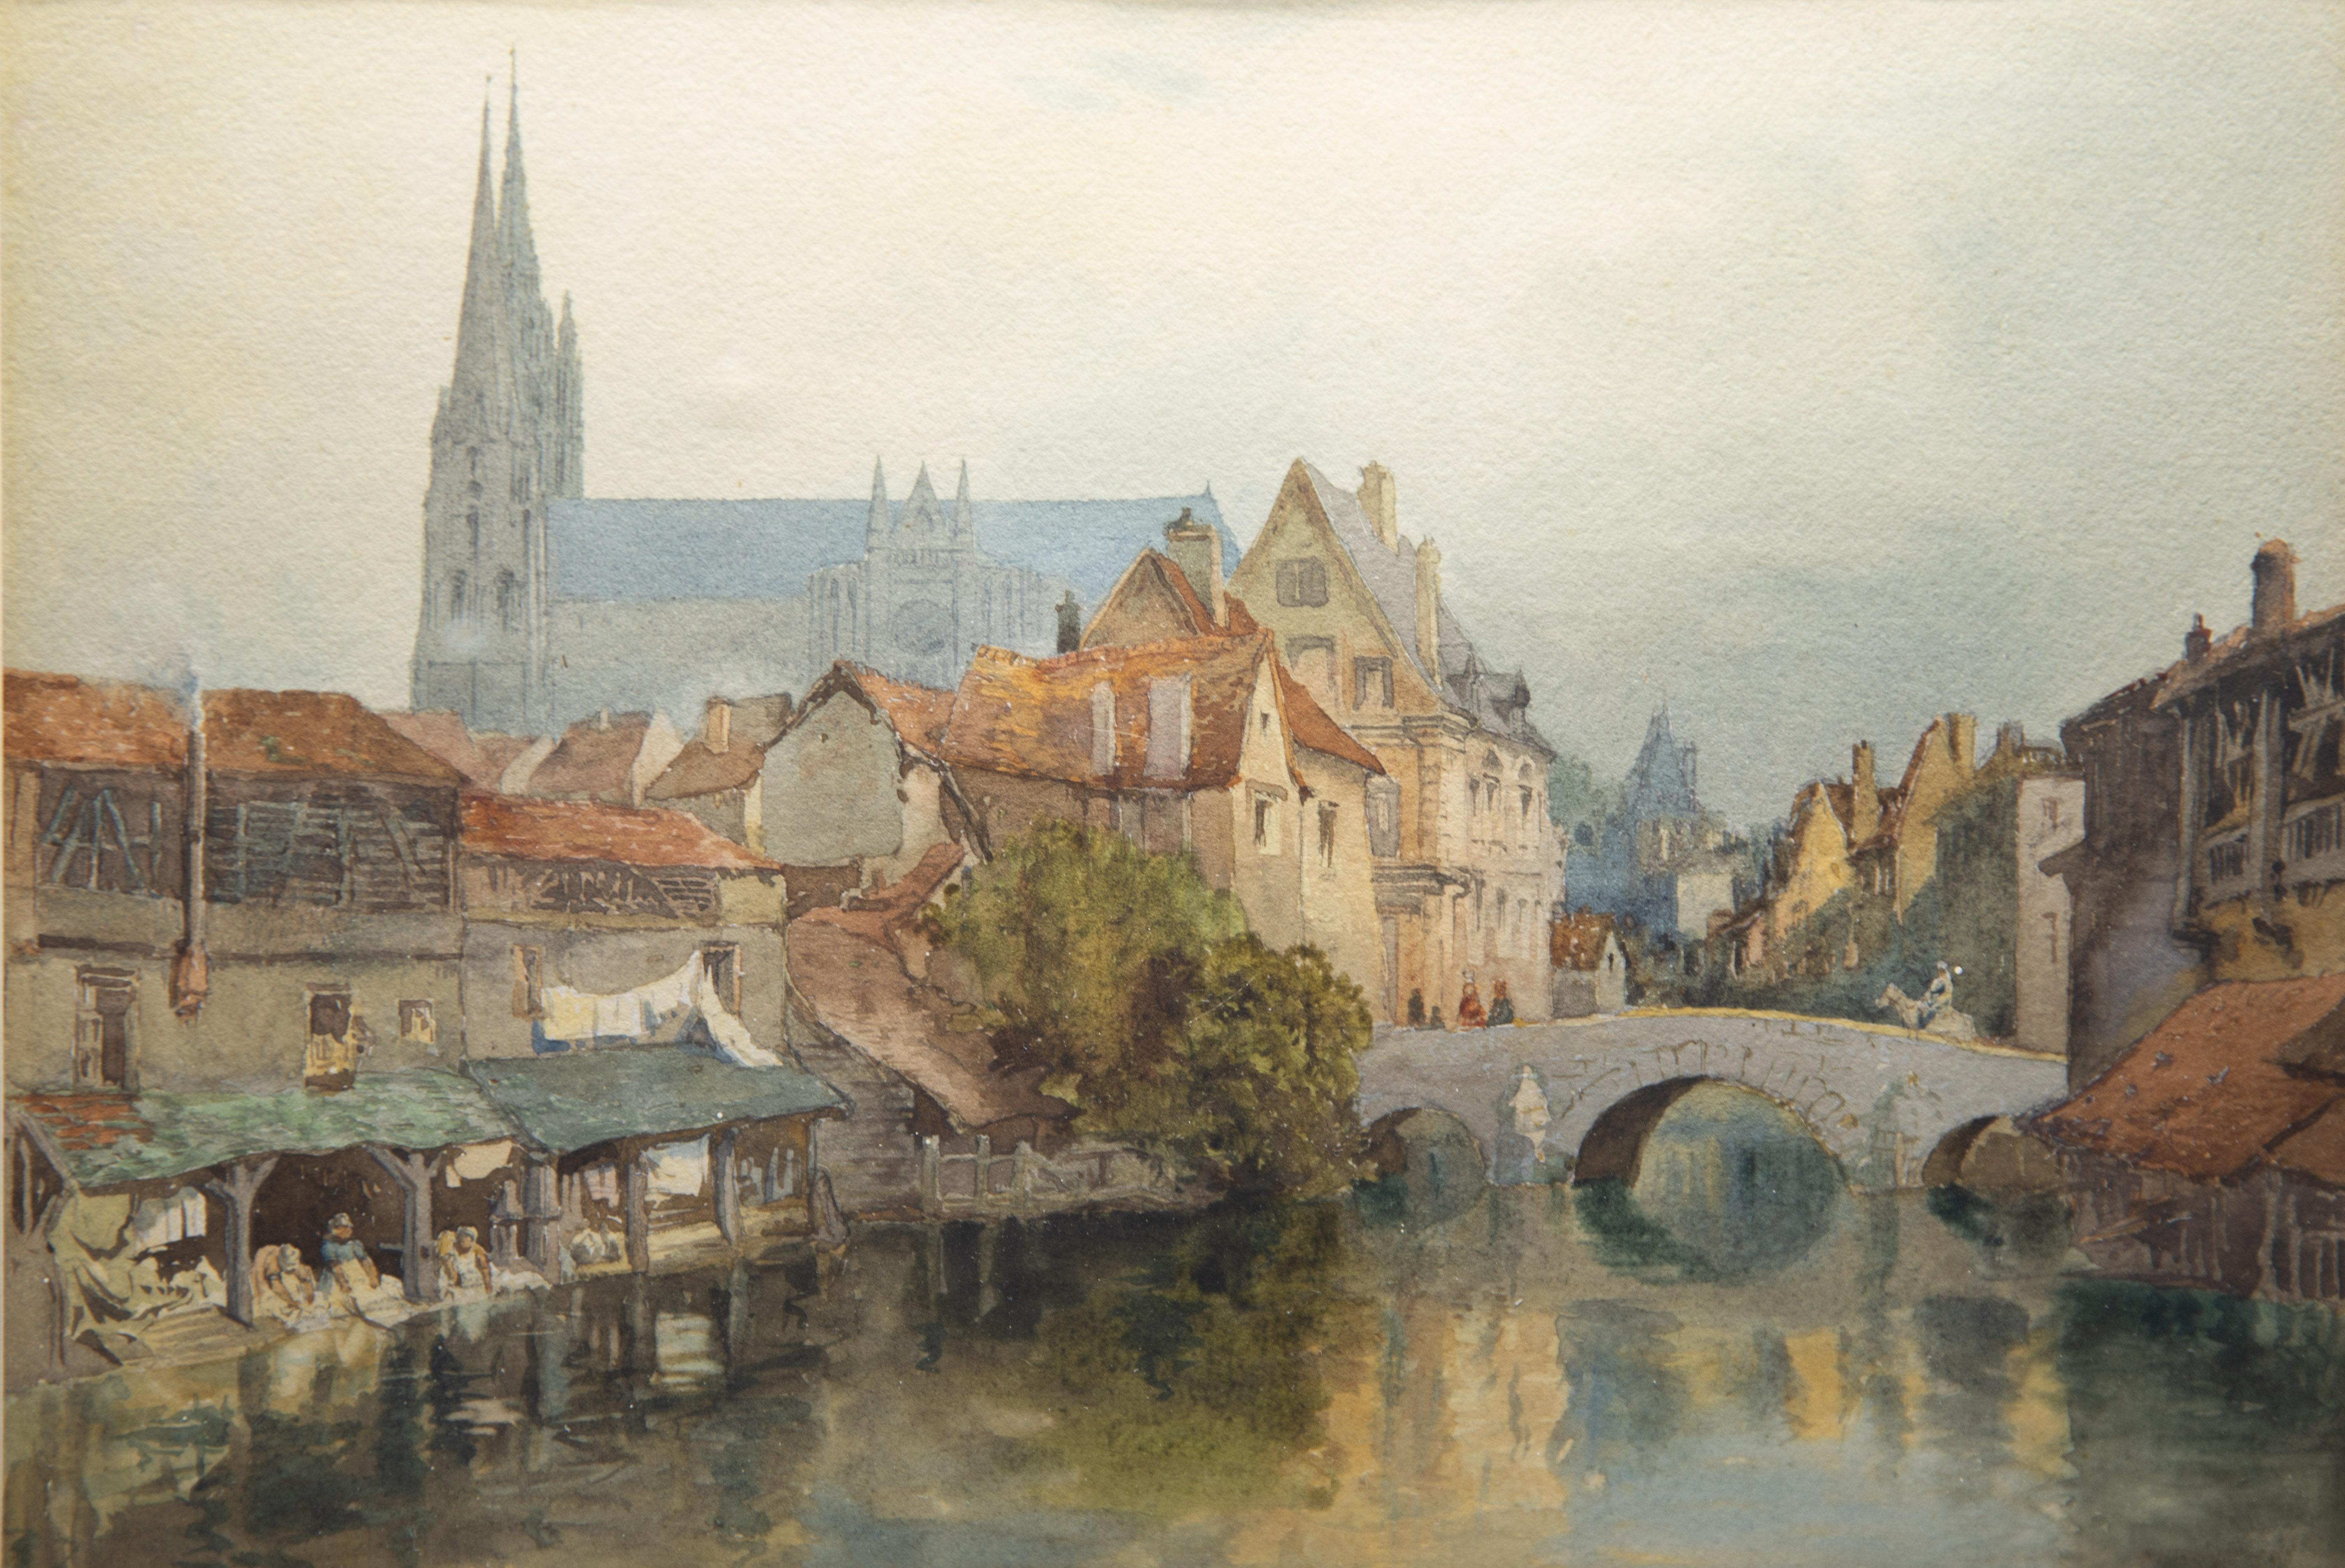 Richard Henry Wright watercolor gouache of Chartres France dated 1906. Gallery label on reverse Chapman Brothers King Roads Chelsea, England. Richard Henry Wright's work has been sold at Christies and he was a member at the Royal Academy of Arts in